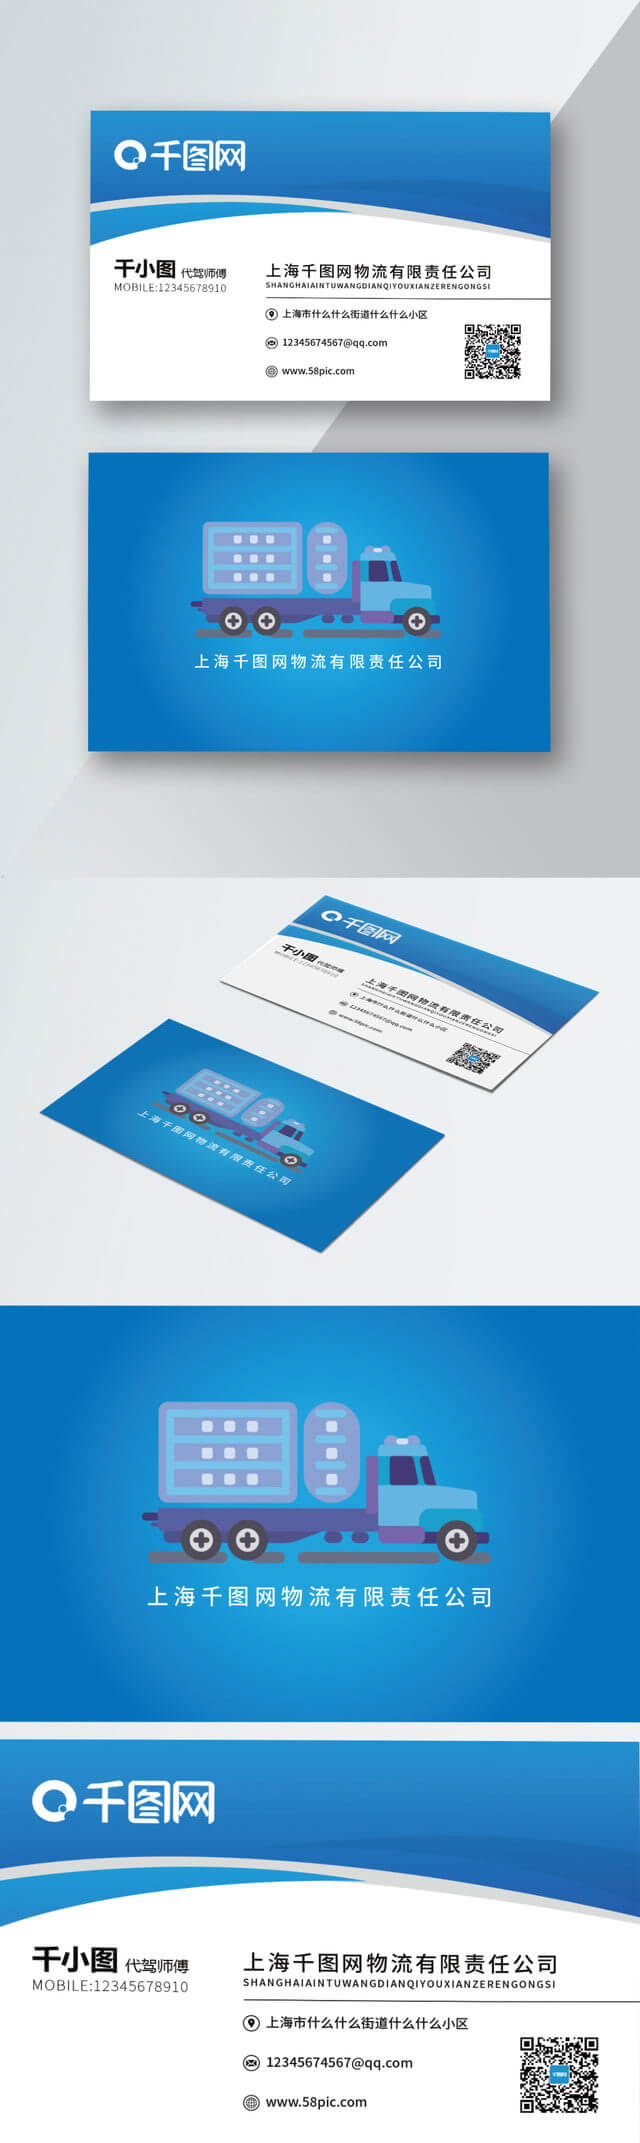 Logistics Company Business Card Vector Material Logistics In Transport Business Cards Templates Free